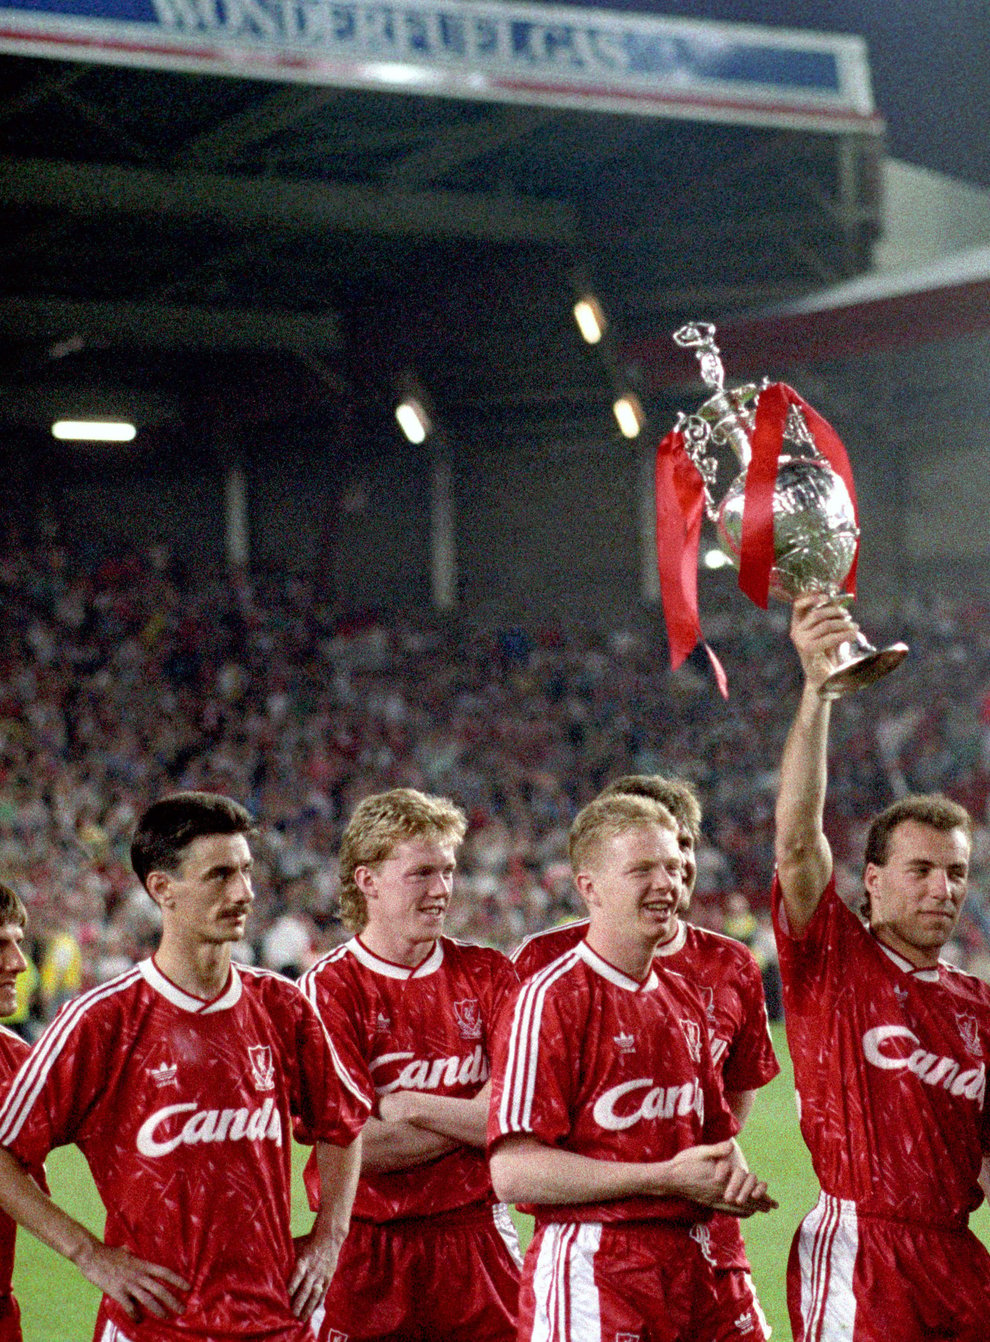 Liverpool's last league title came in 1990